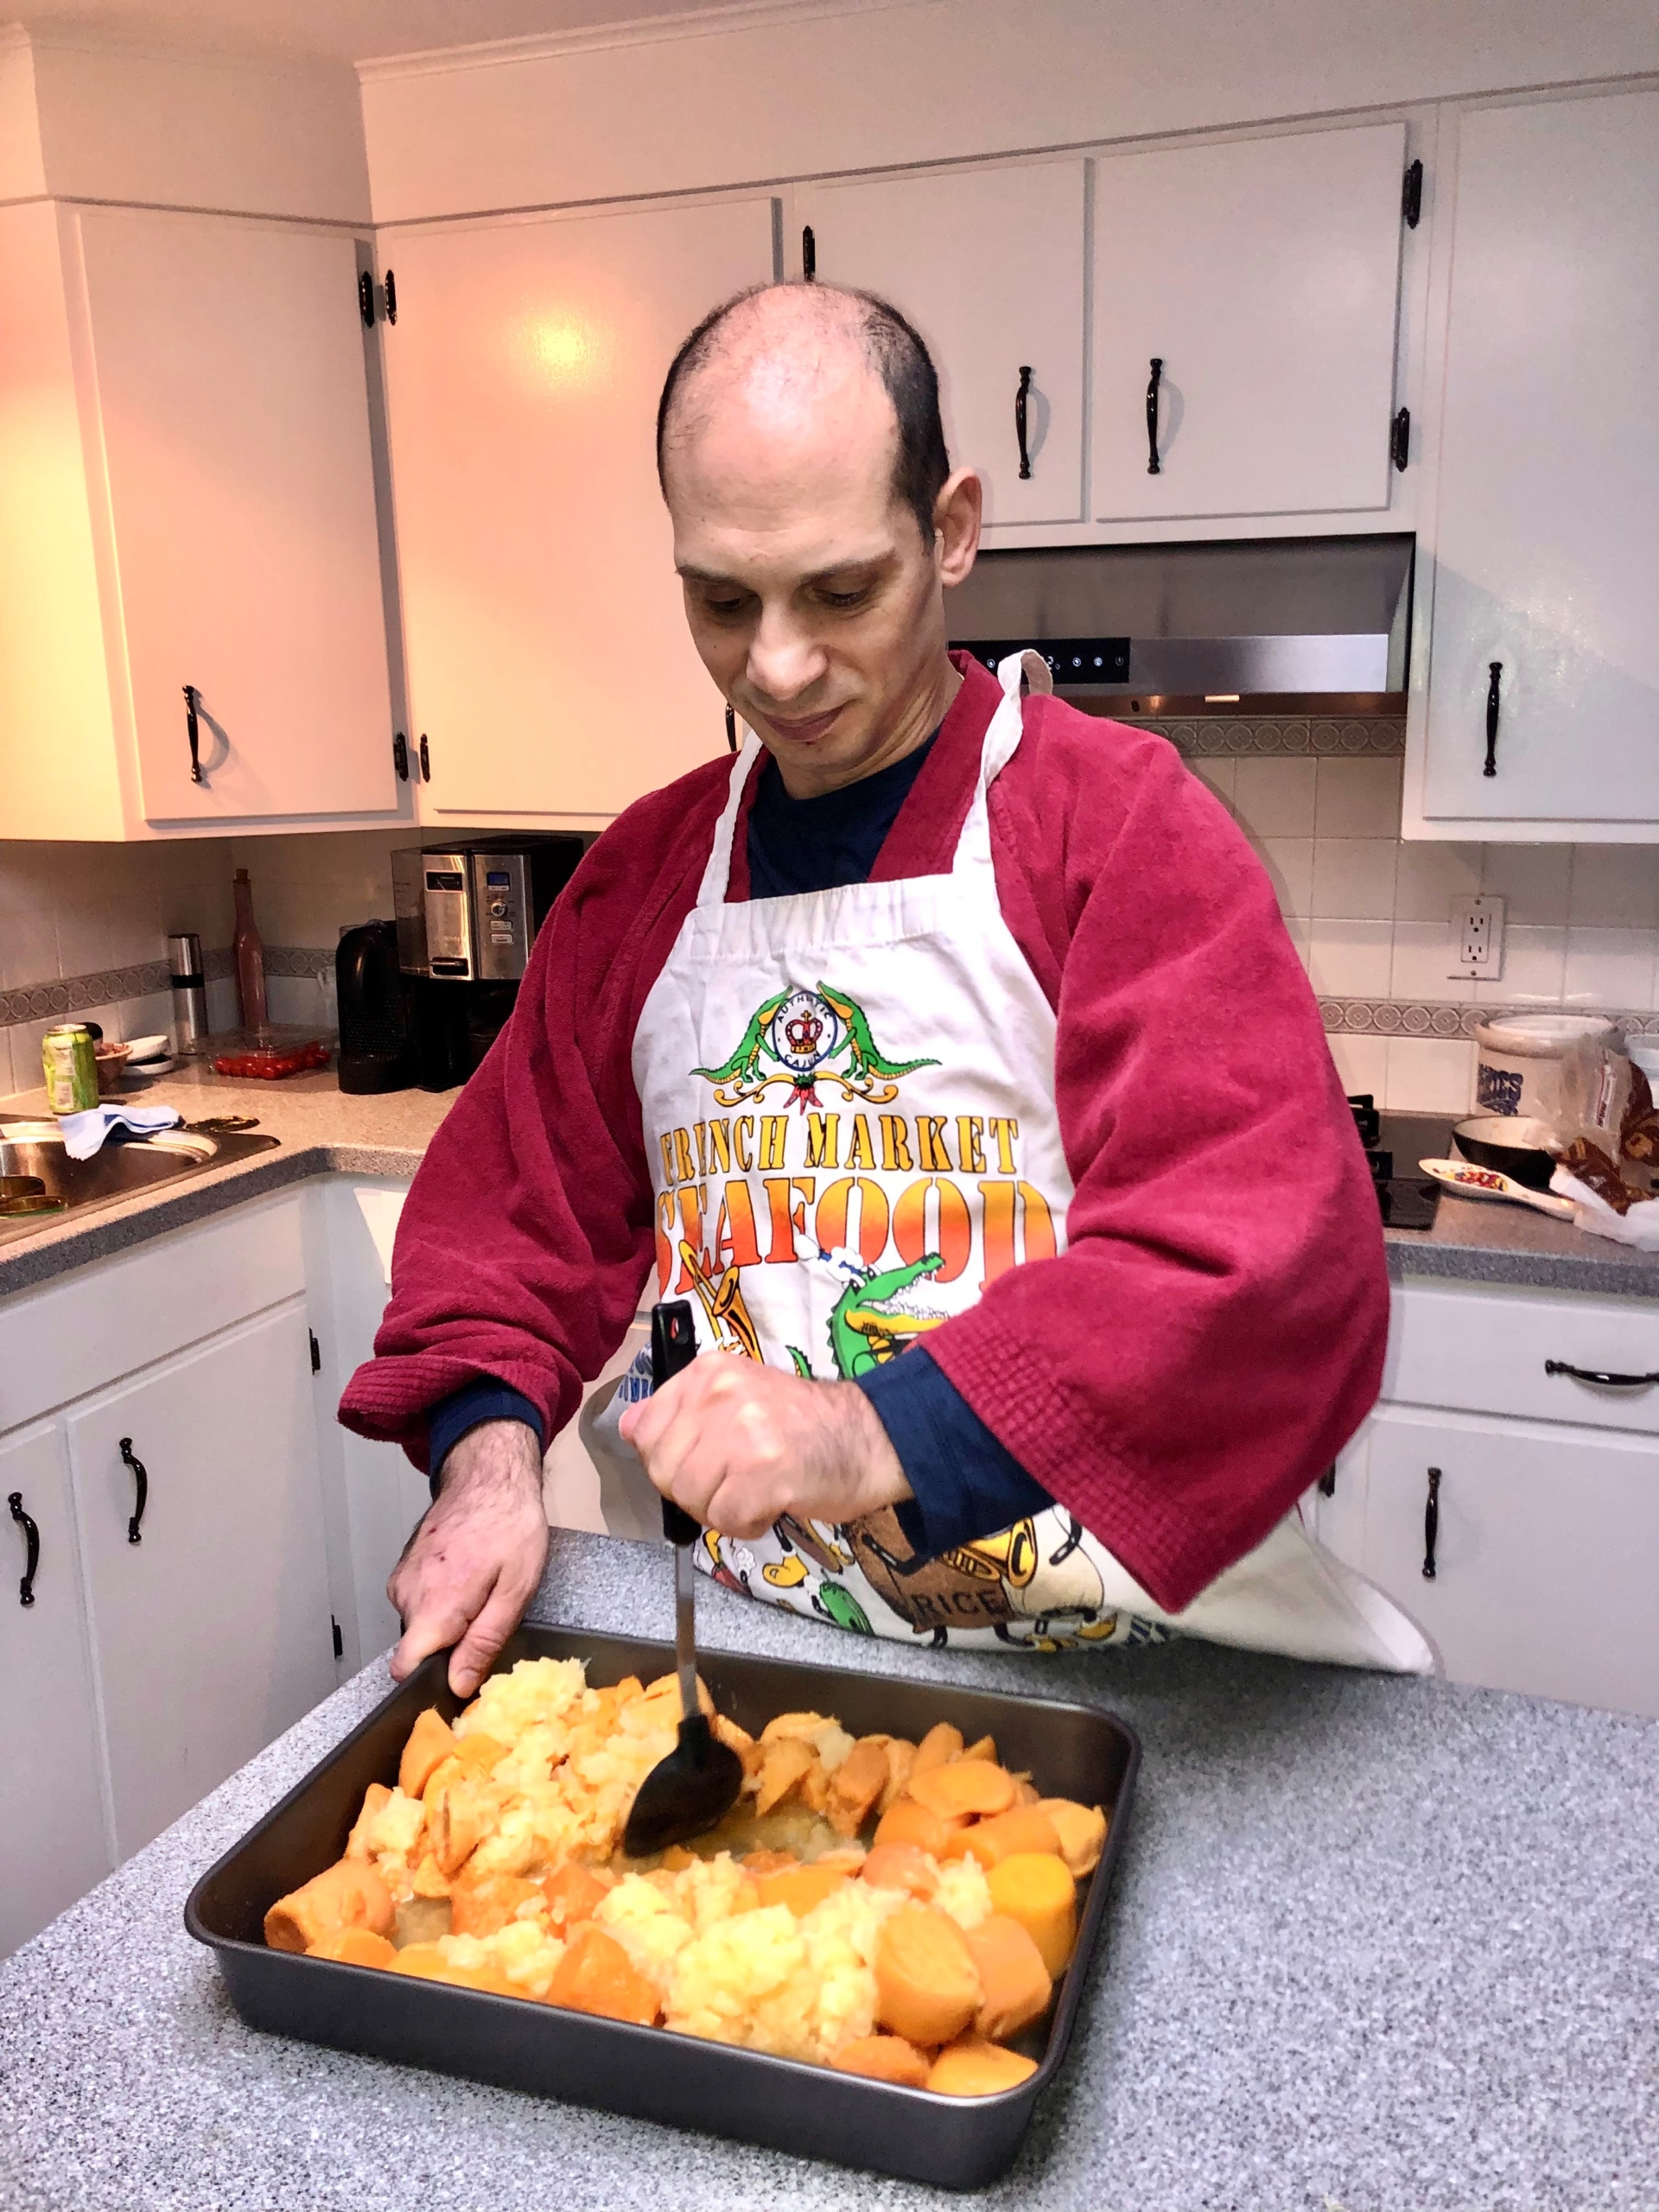 A middle-aged man stands in a kitchen with white cabinets. He is wearing a red shirt, and apron, and is using a cooking utensil on a sheet pan of food. 